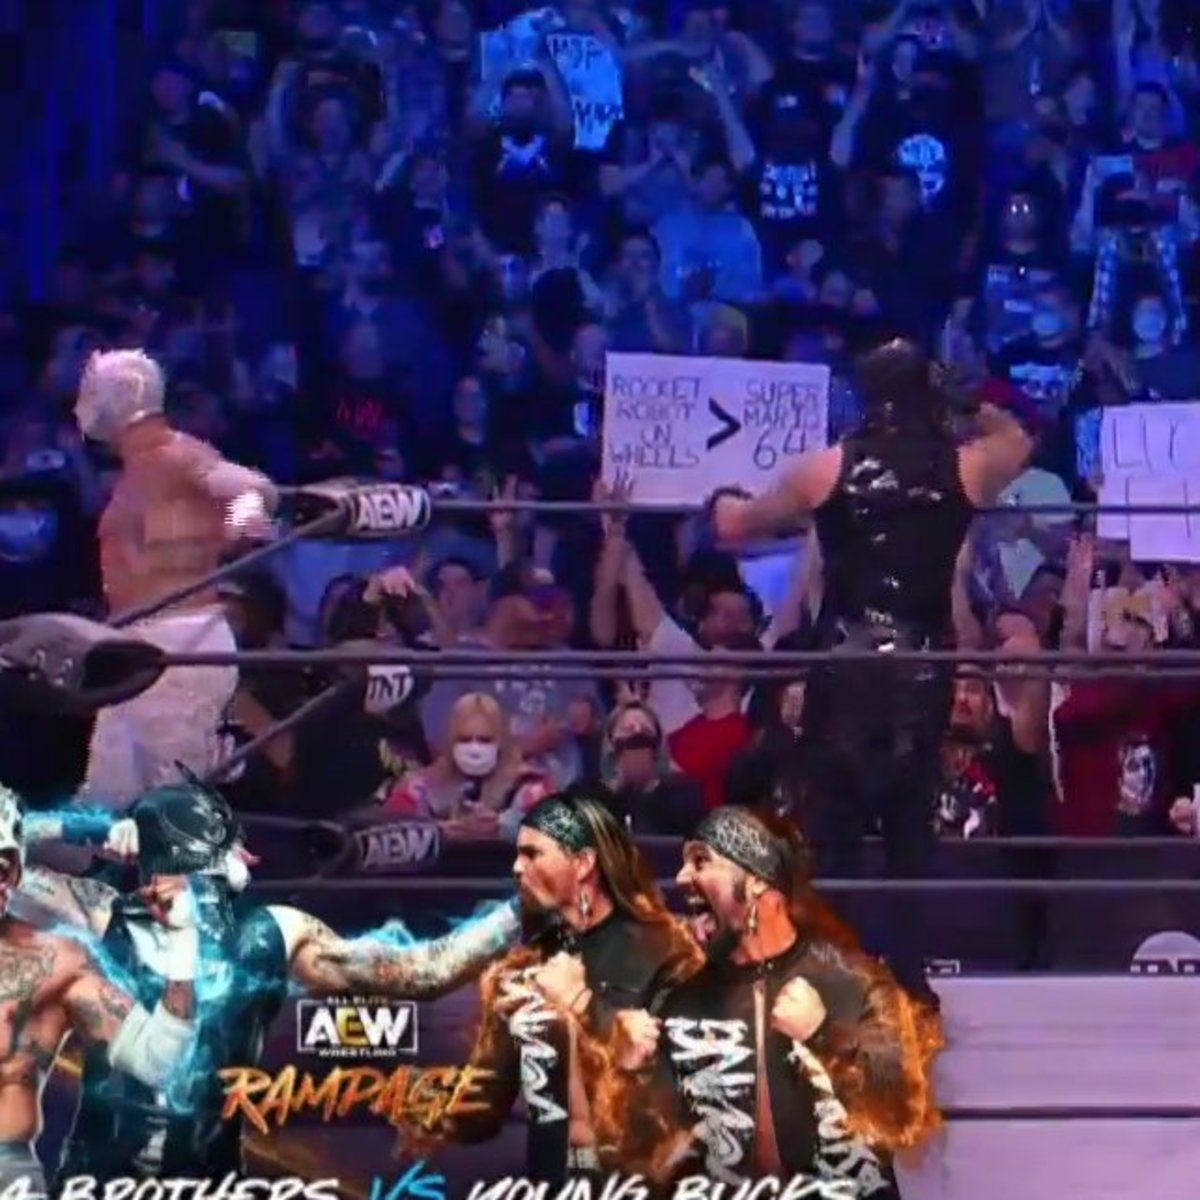 AEW fan sign that says "Rocket Robot on Wheels > Super Mario 64" behind the Lucha Brothers